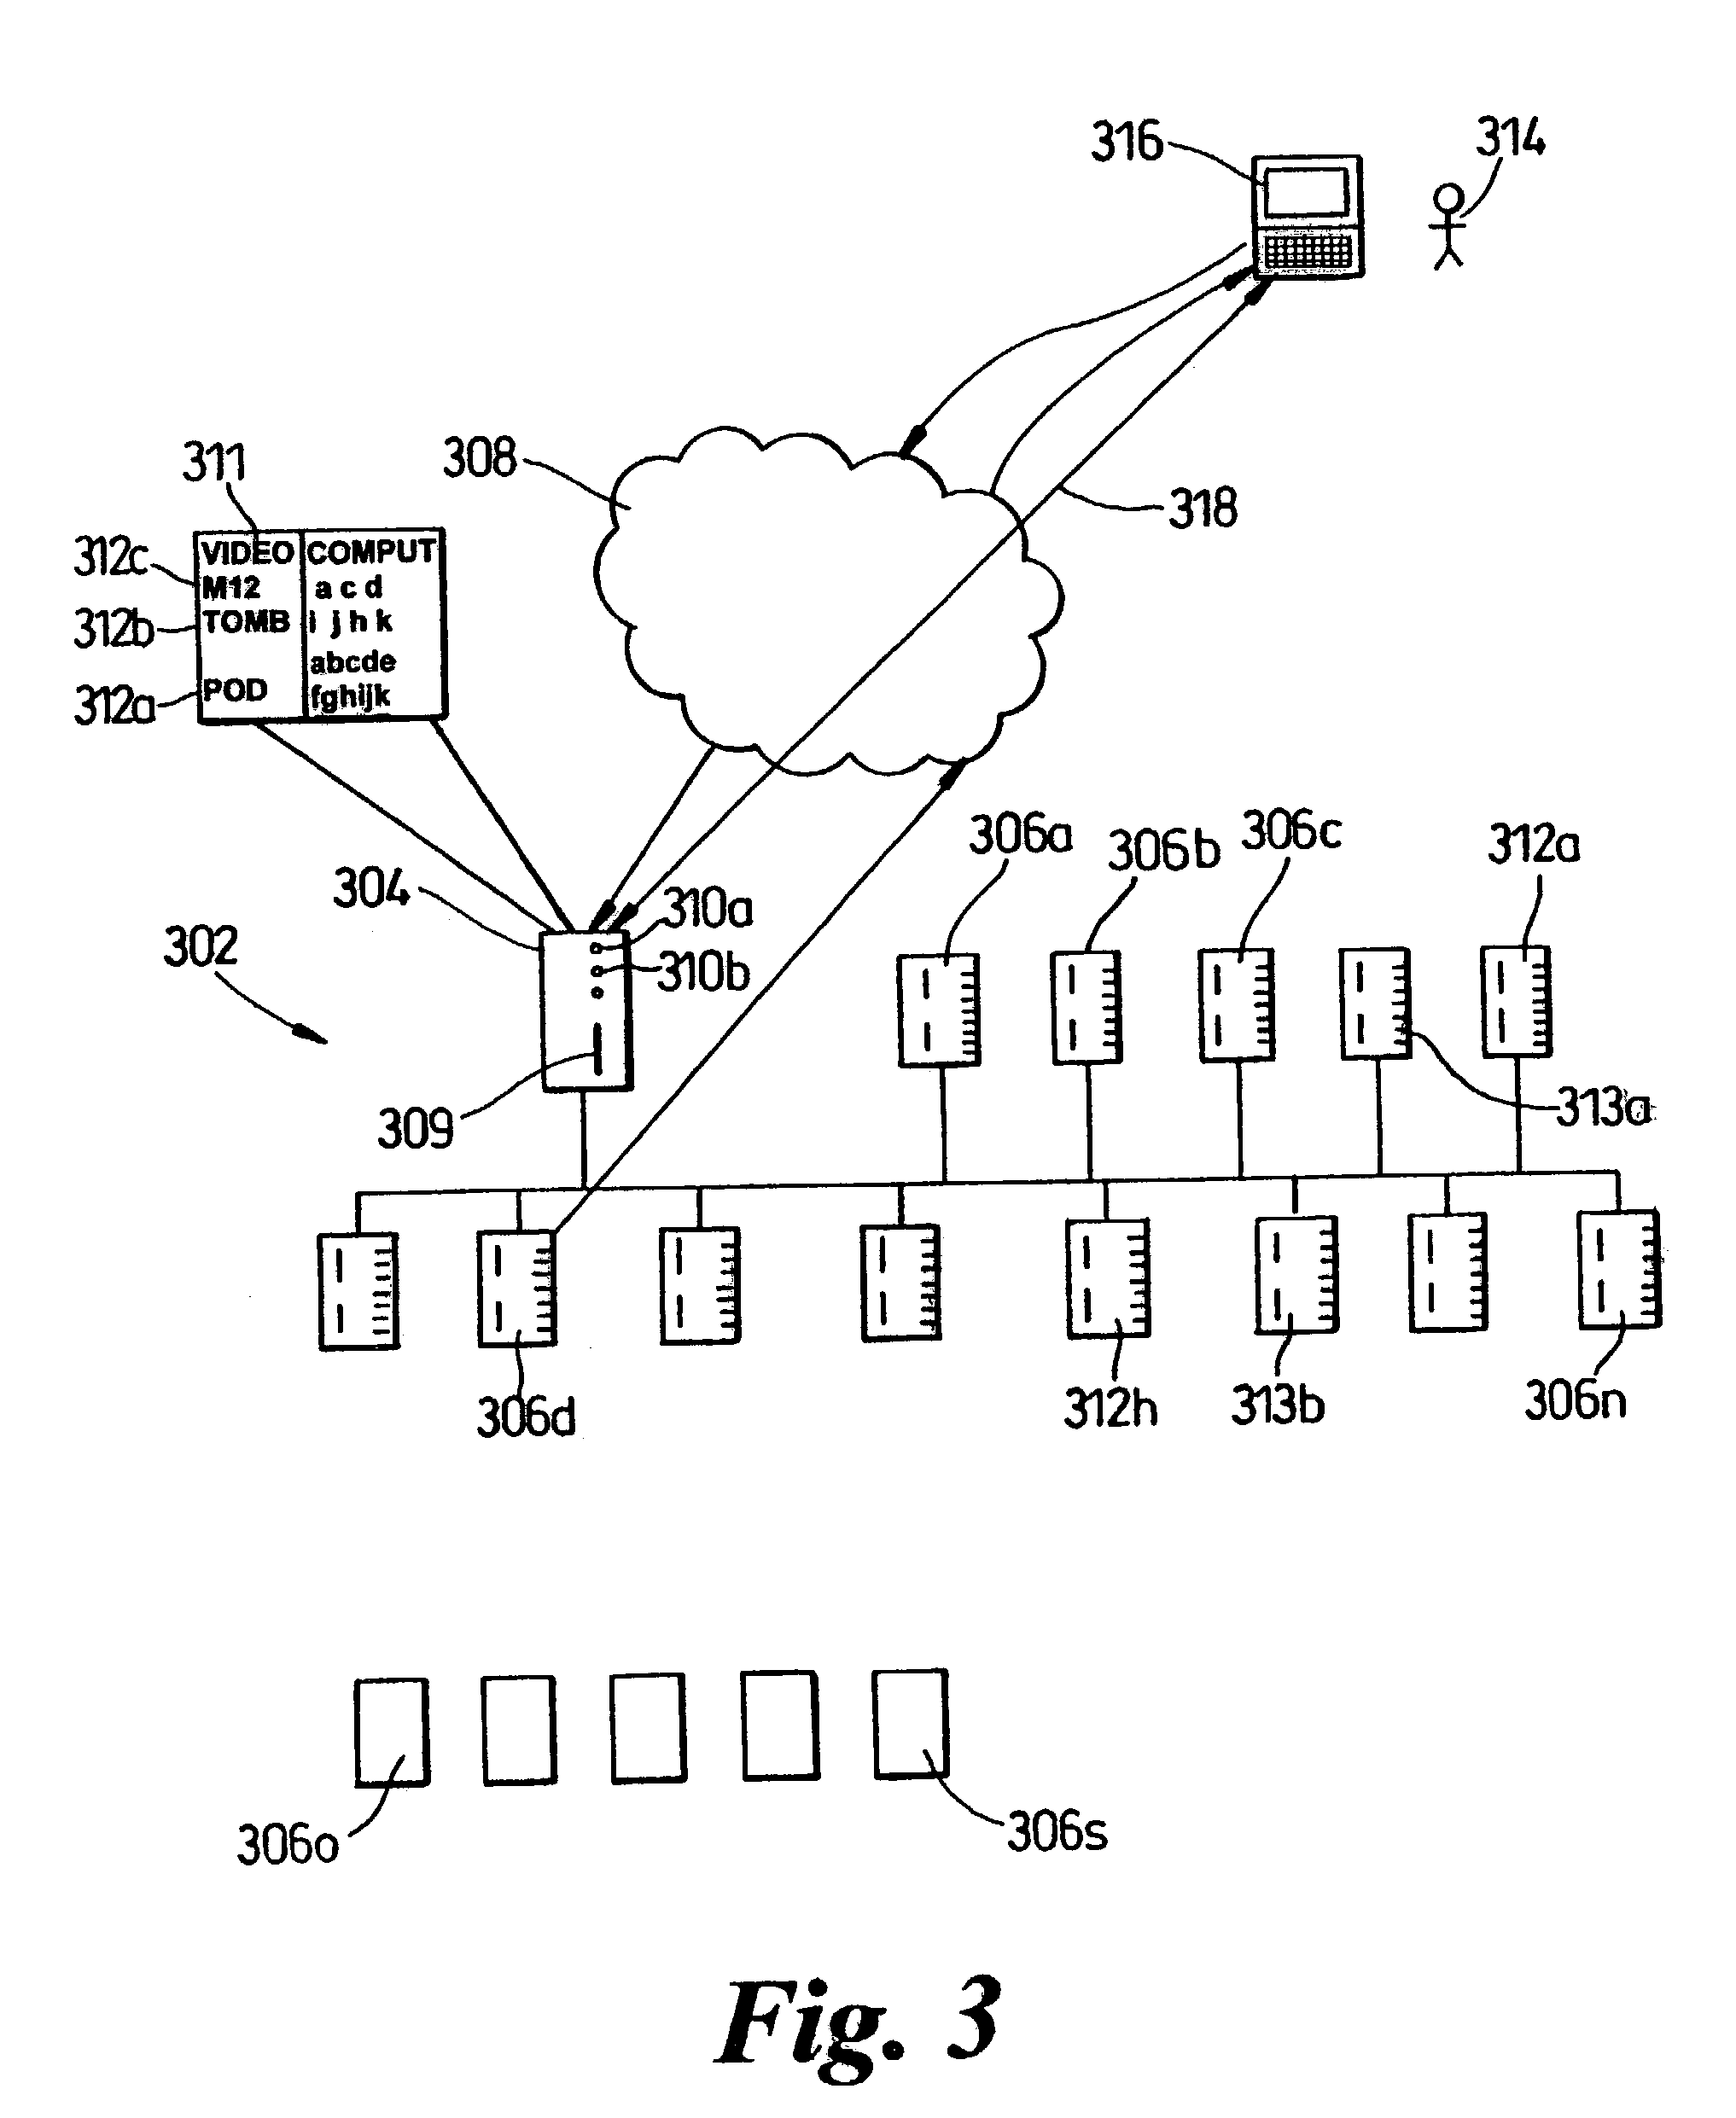 Systems and methods of maintaining availability of requested network resources